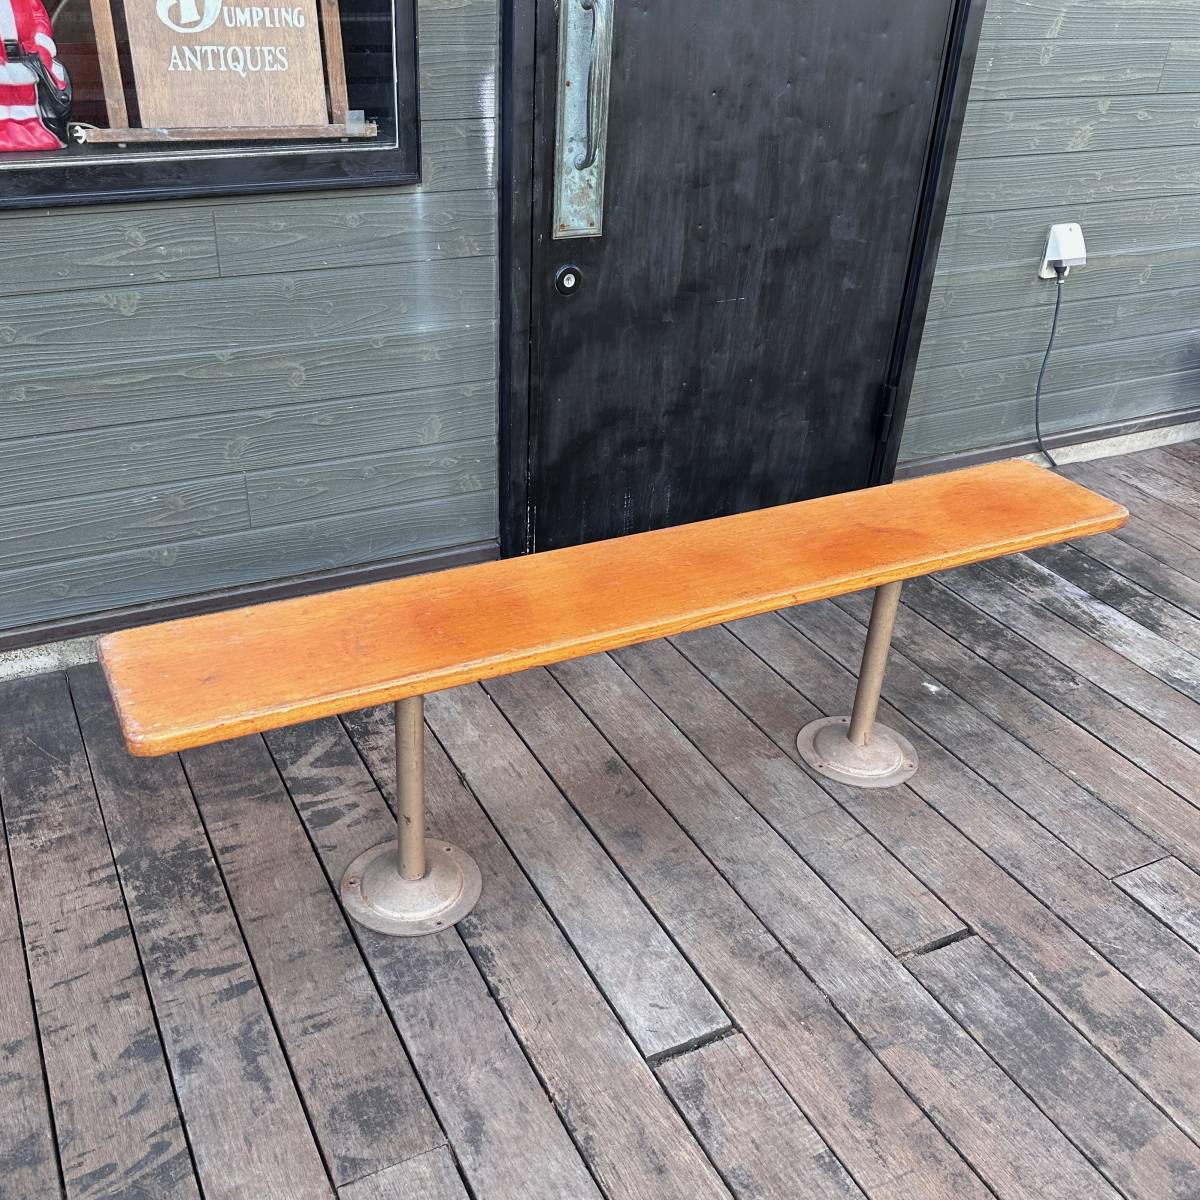 【Vintage】~1970s Wood Bench ウッドベンチ チェア イス 椅子 長椅子 店舗什器 ディスプレイ台 古着 ヴィンテージ アンティーク